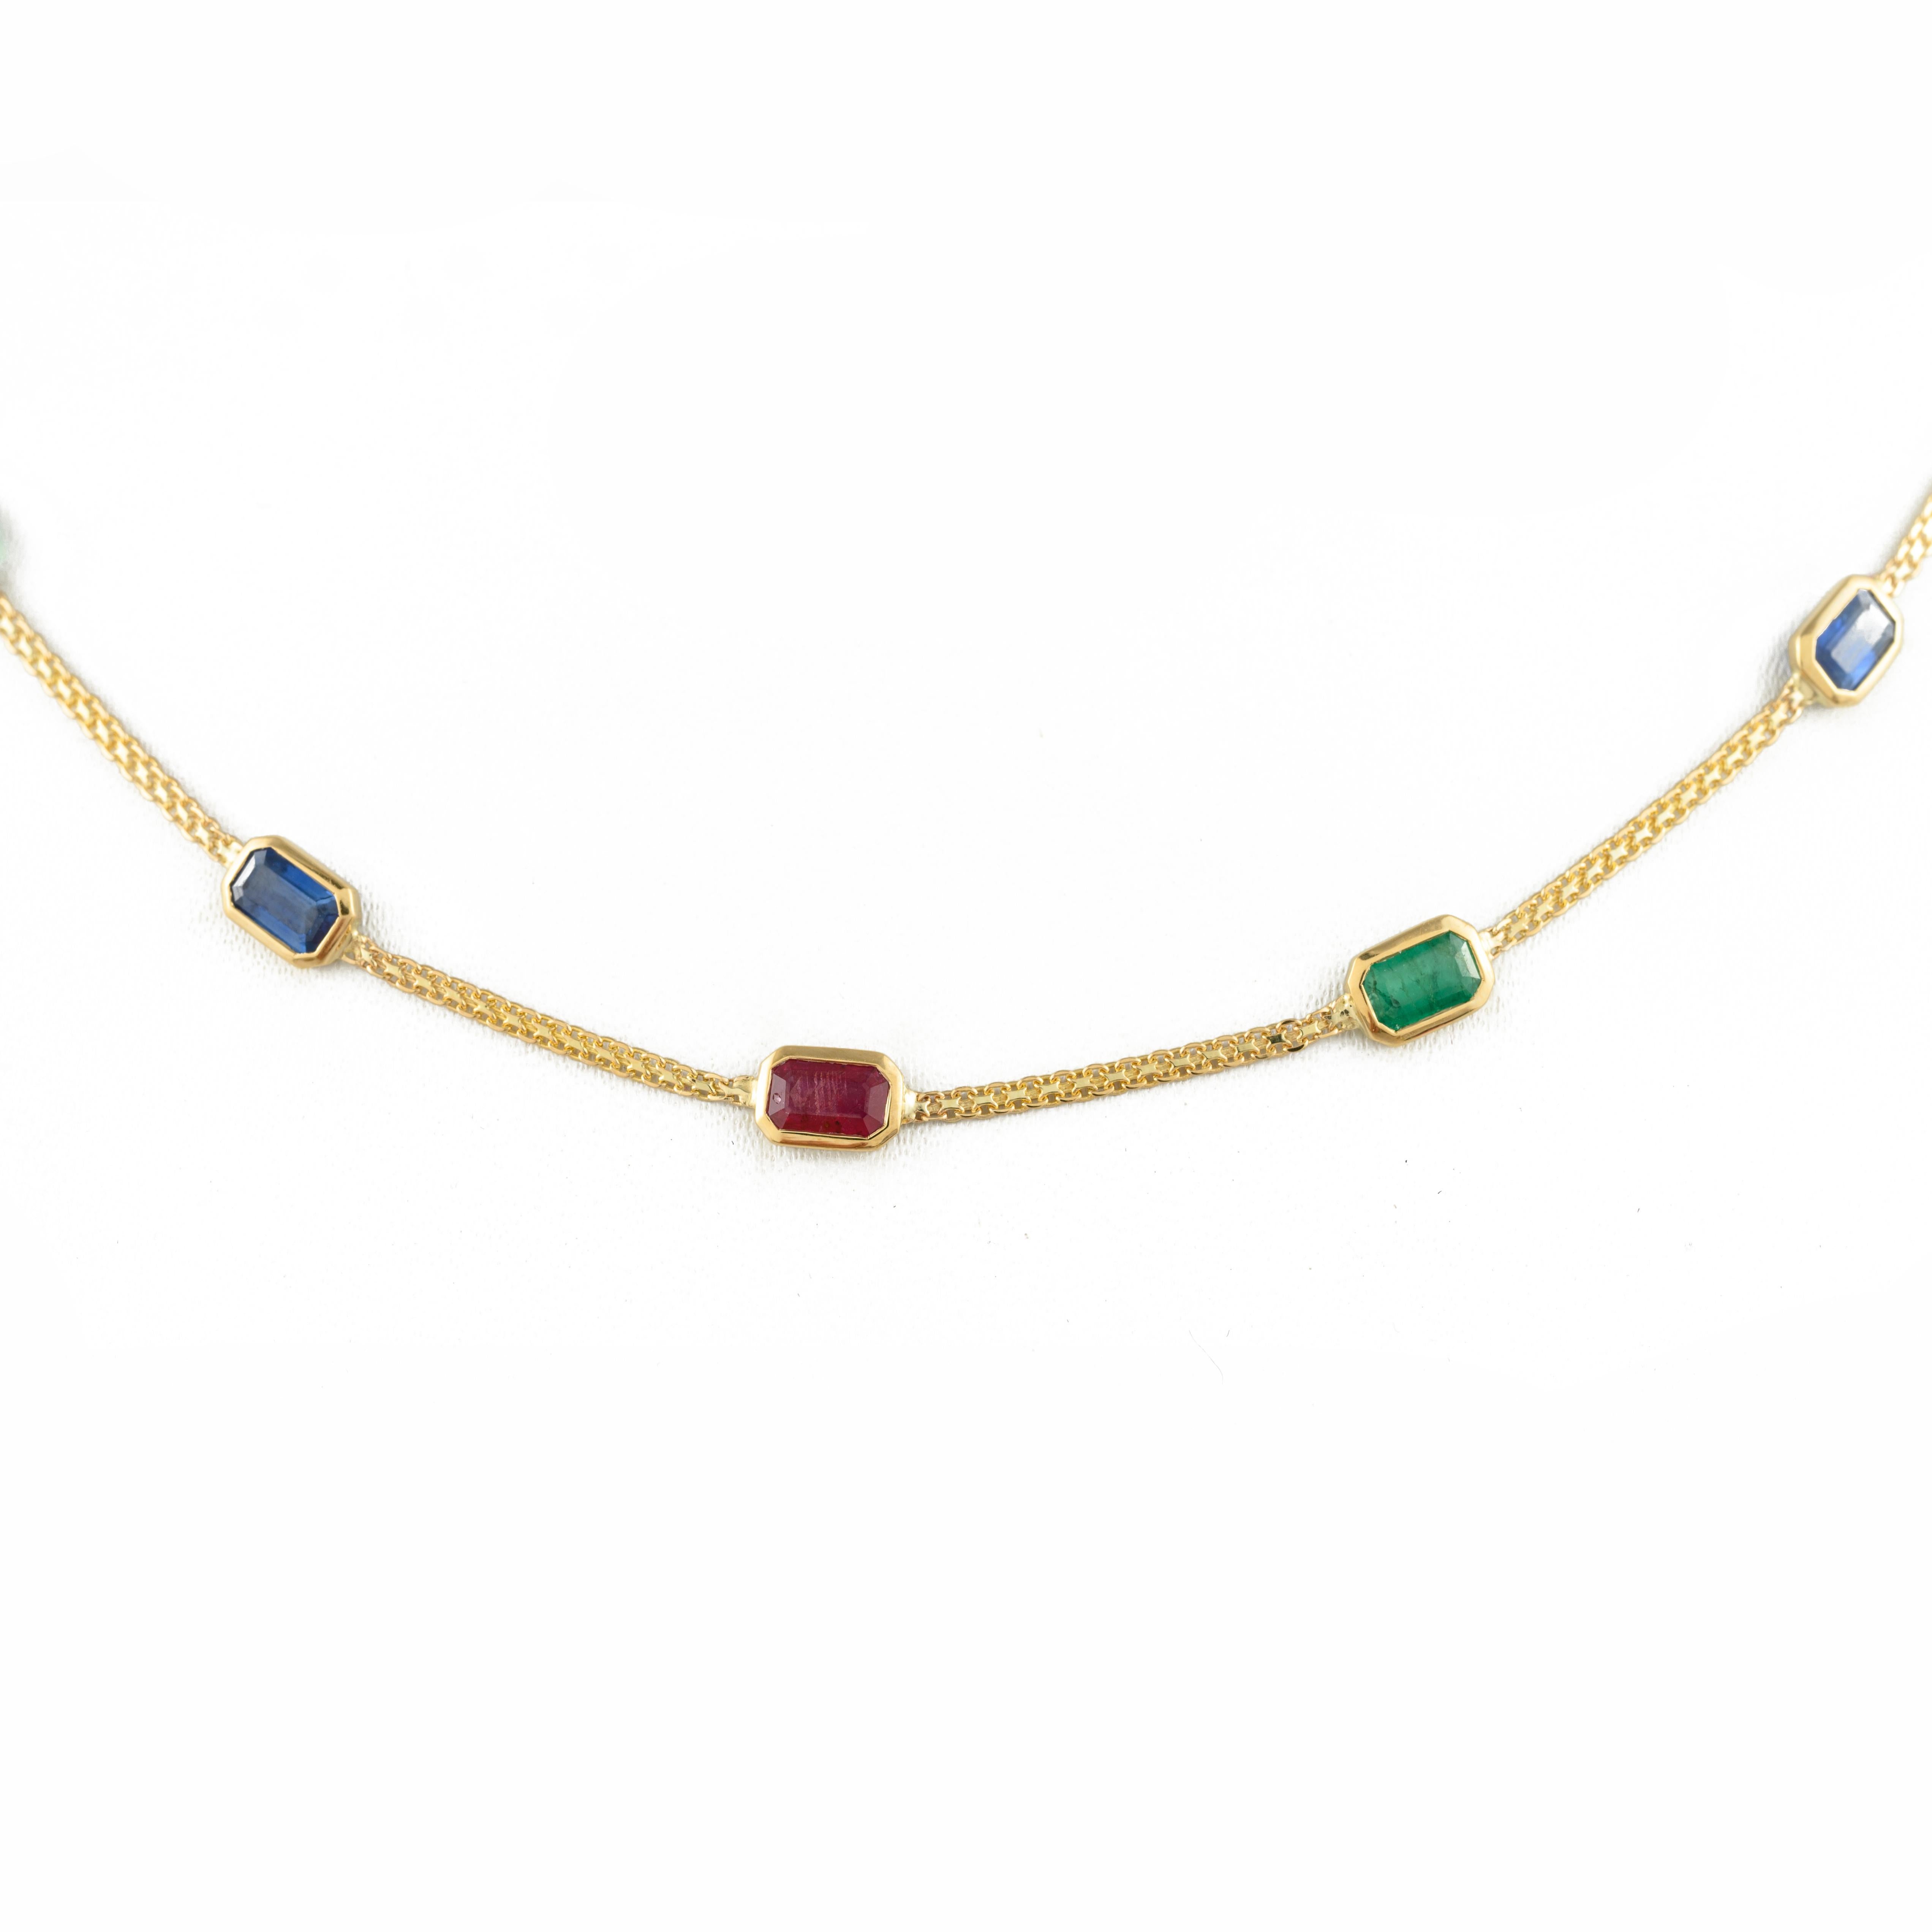 Emerald Ruby Sapphire Choker Necklace studded with emerald, ruby and sapphire in 18K Gold. This stunning piece of jewelry instantly elevates a casual look or dressy outfit. 
Emerald enhances the intellectual capacity, sapphire stimulates